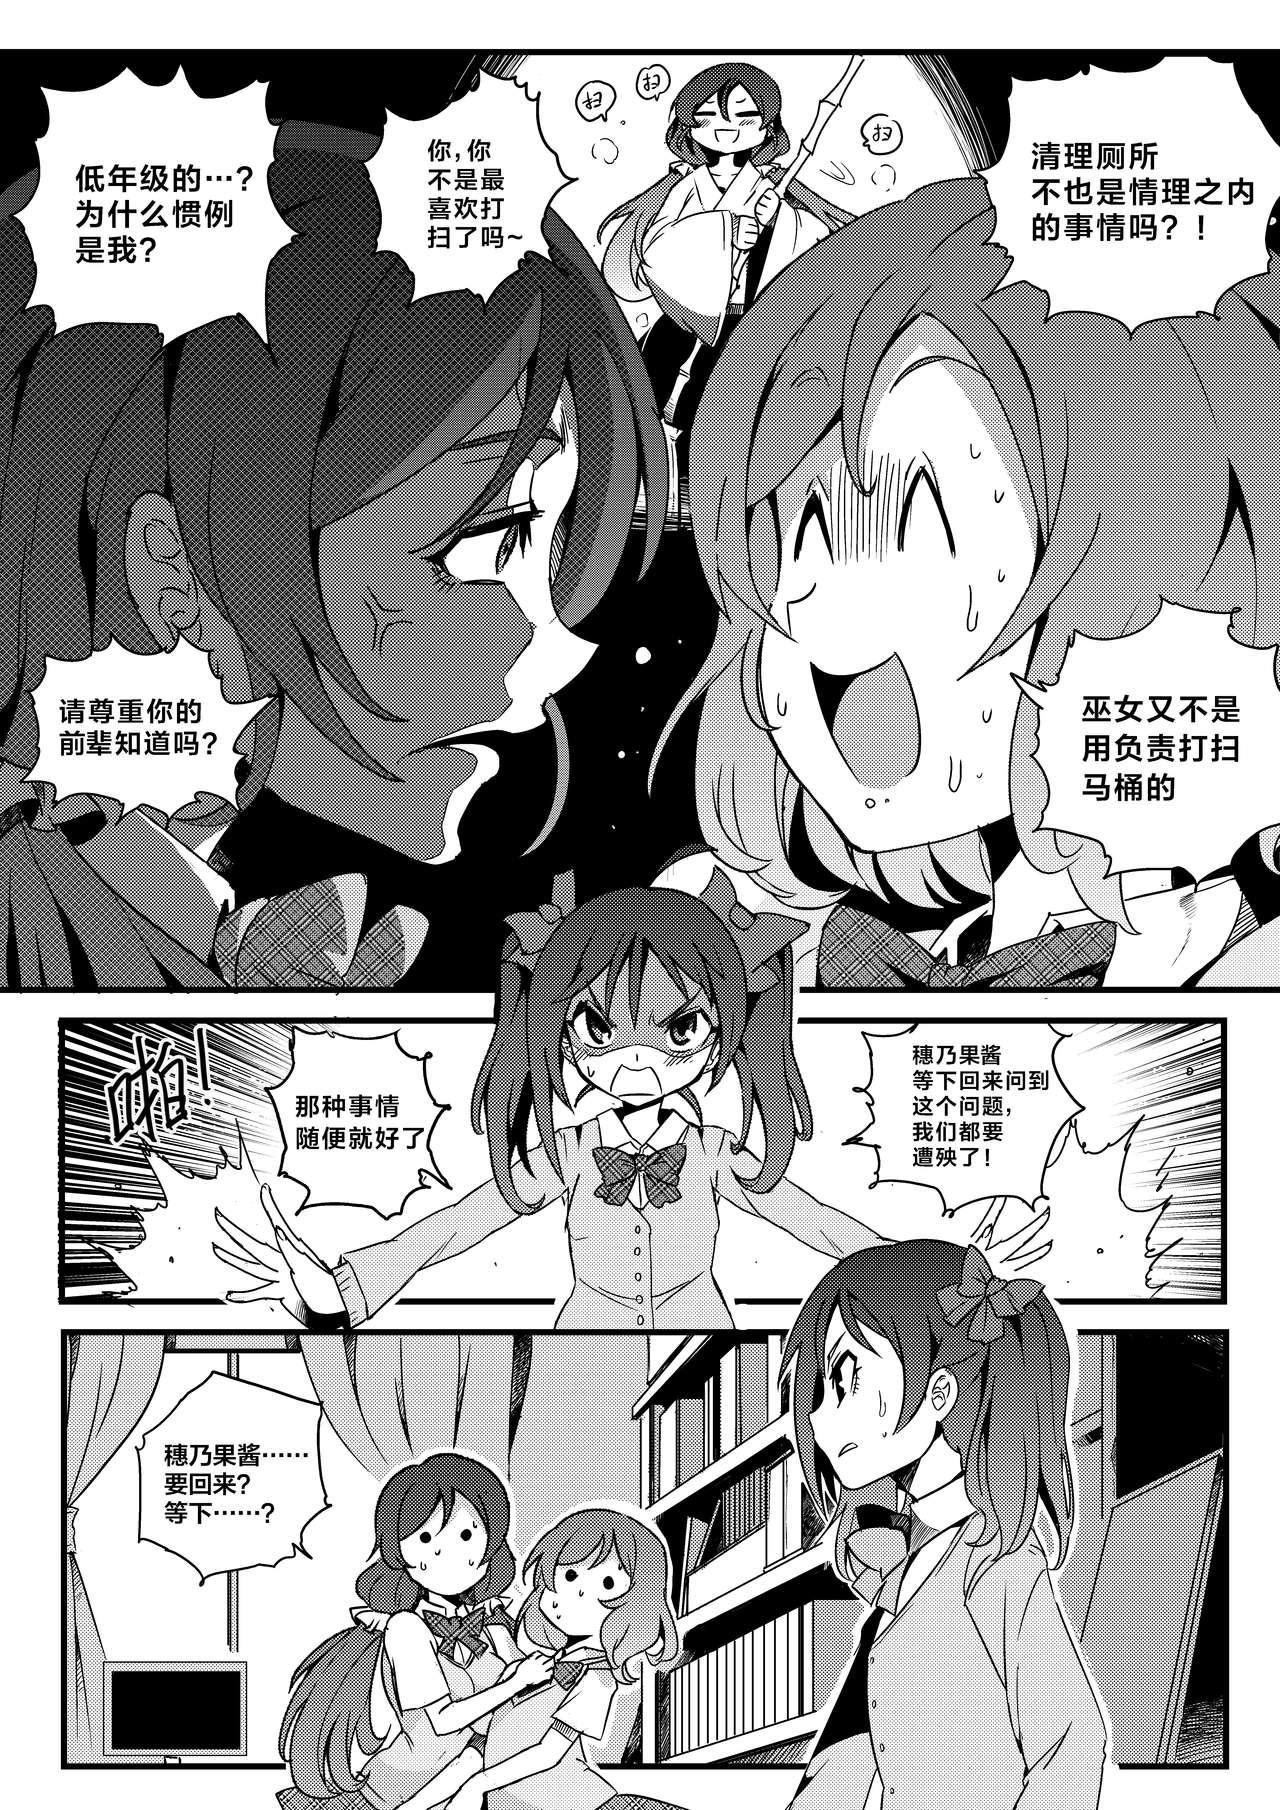 Chaturbate 果胆卯威 - Kantai collection The idolmaster Love live Young Men - Page 4